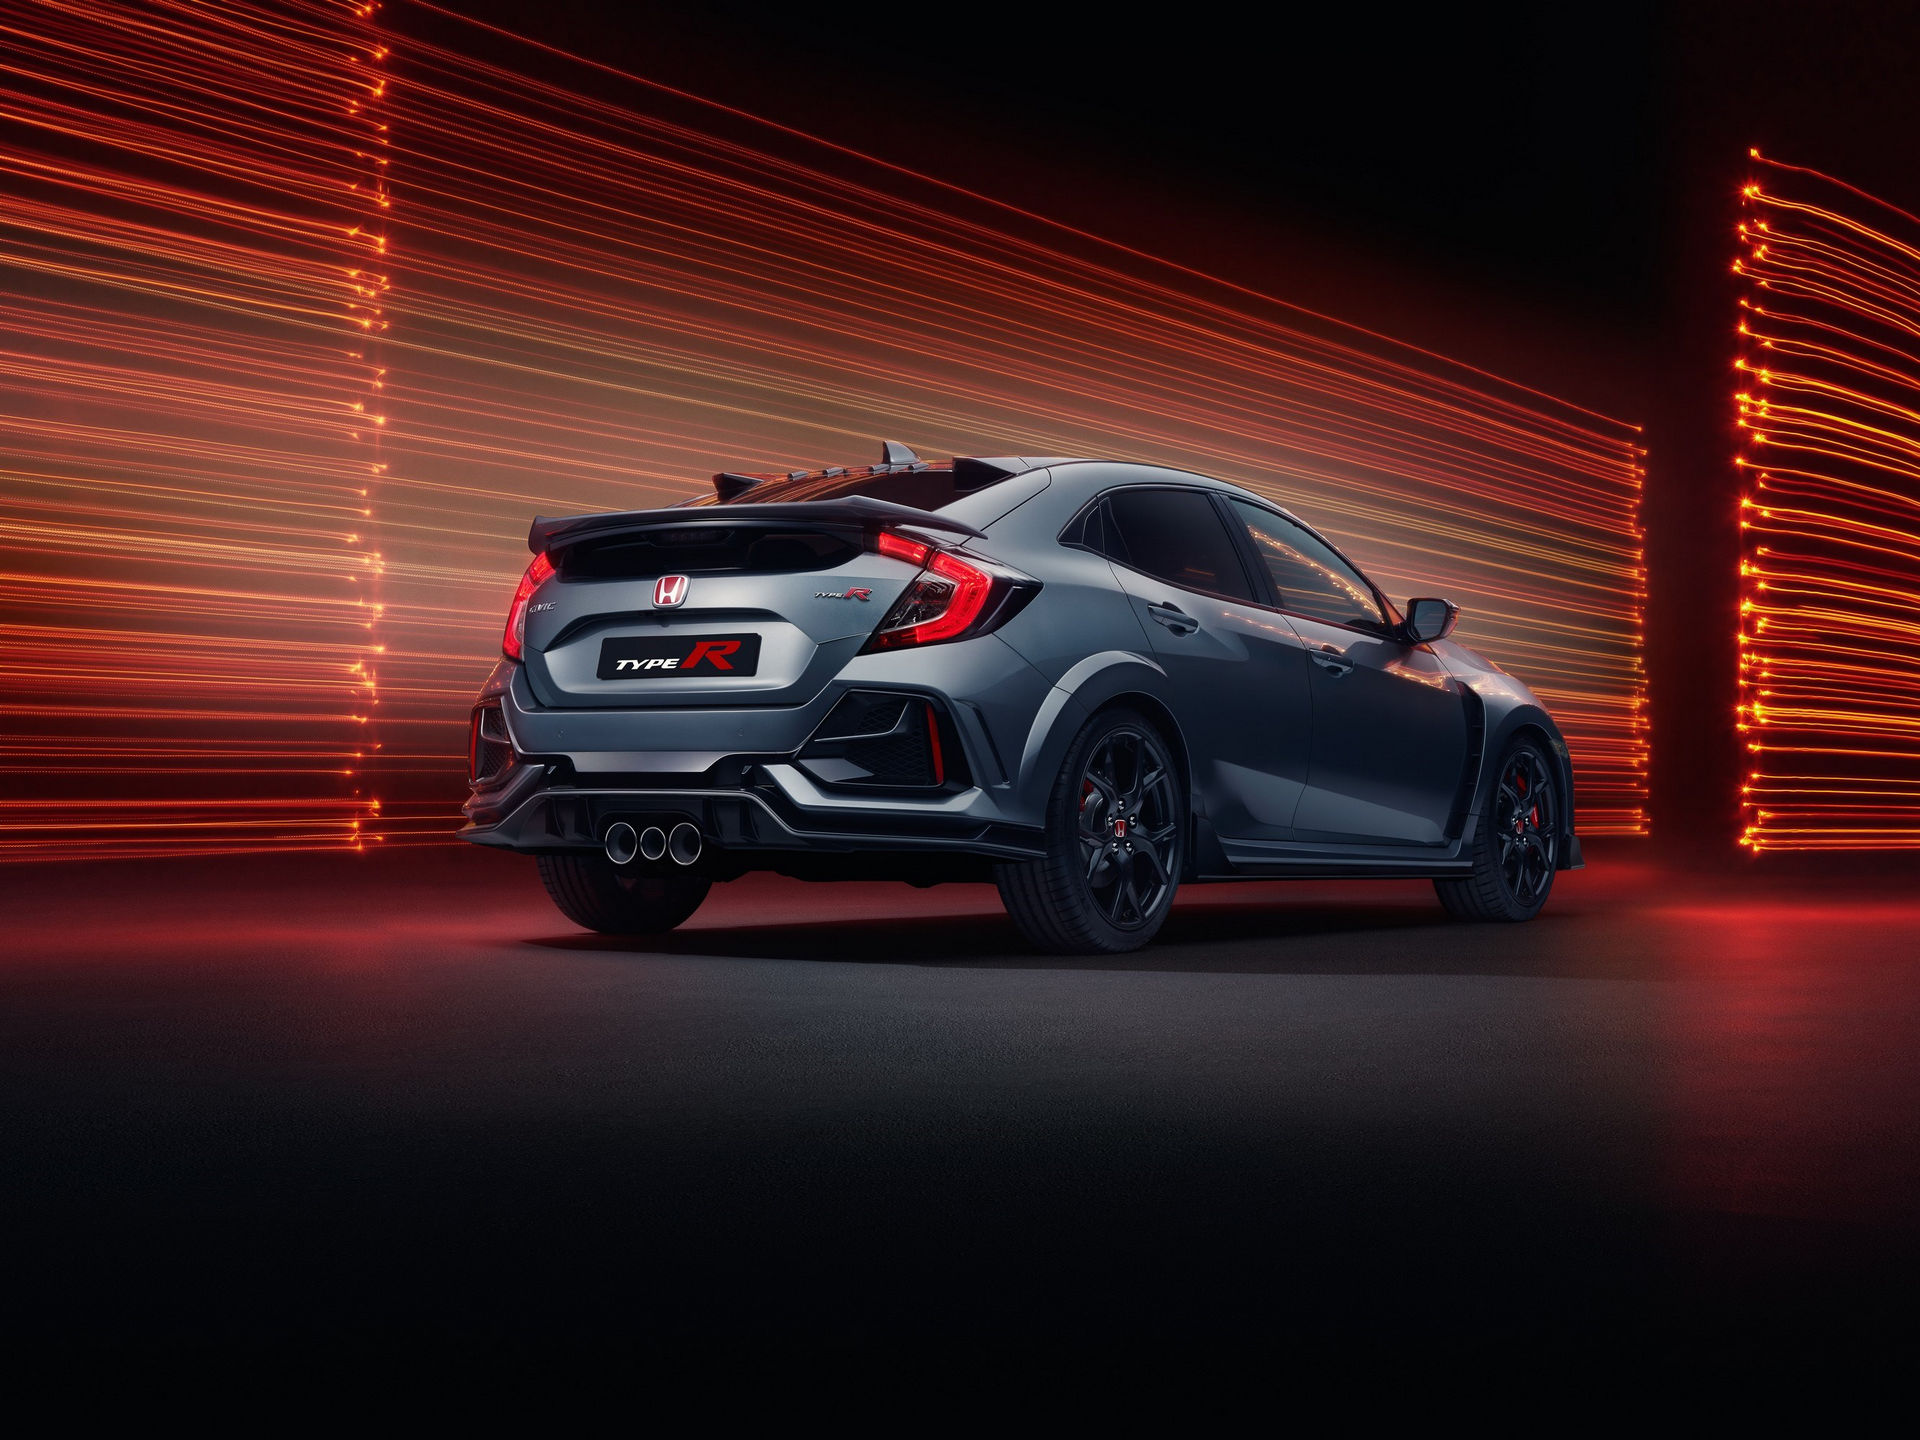 Find Honda S Civic Type R Over The Top Enter The Sport Line That Tames The Edgy Styling Carscoops